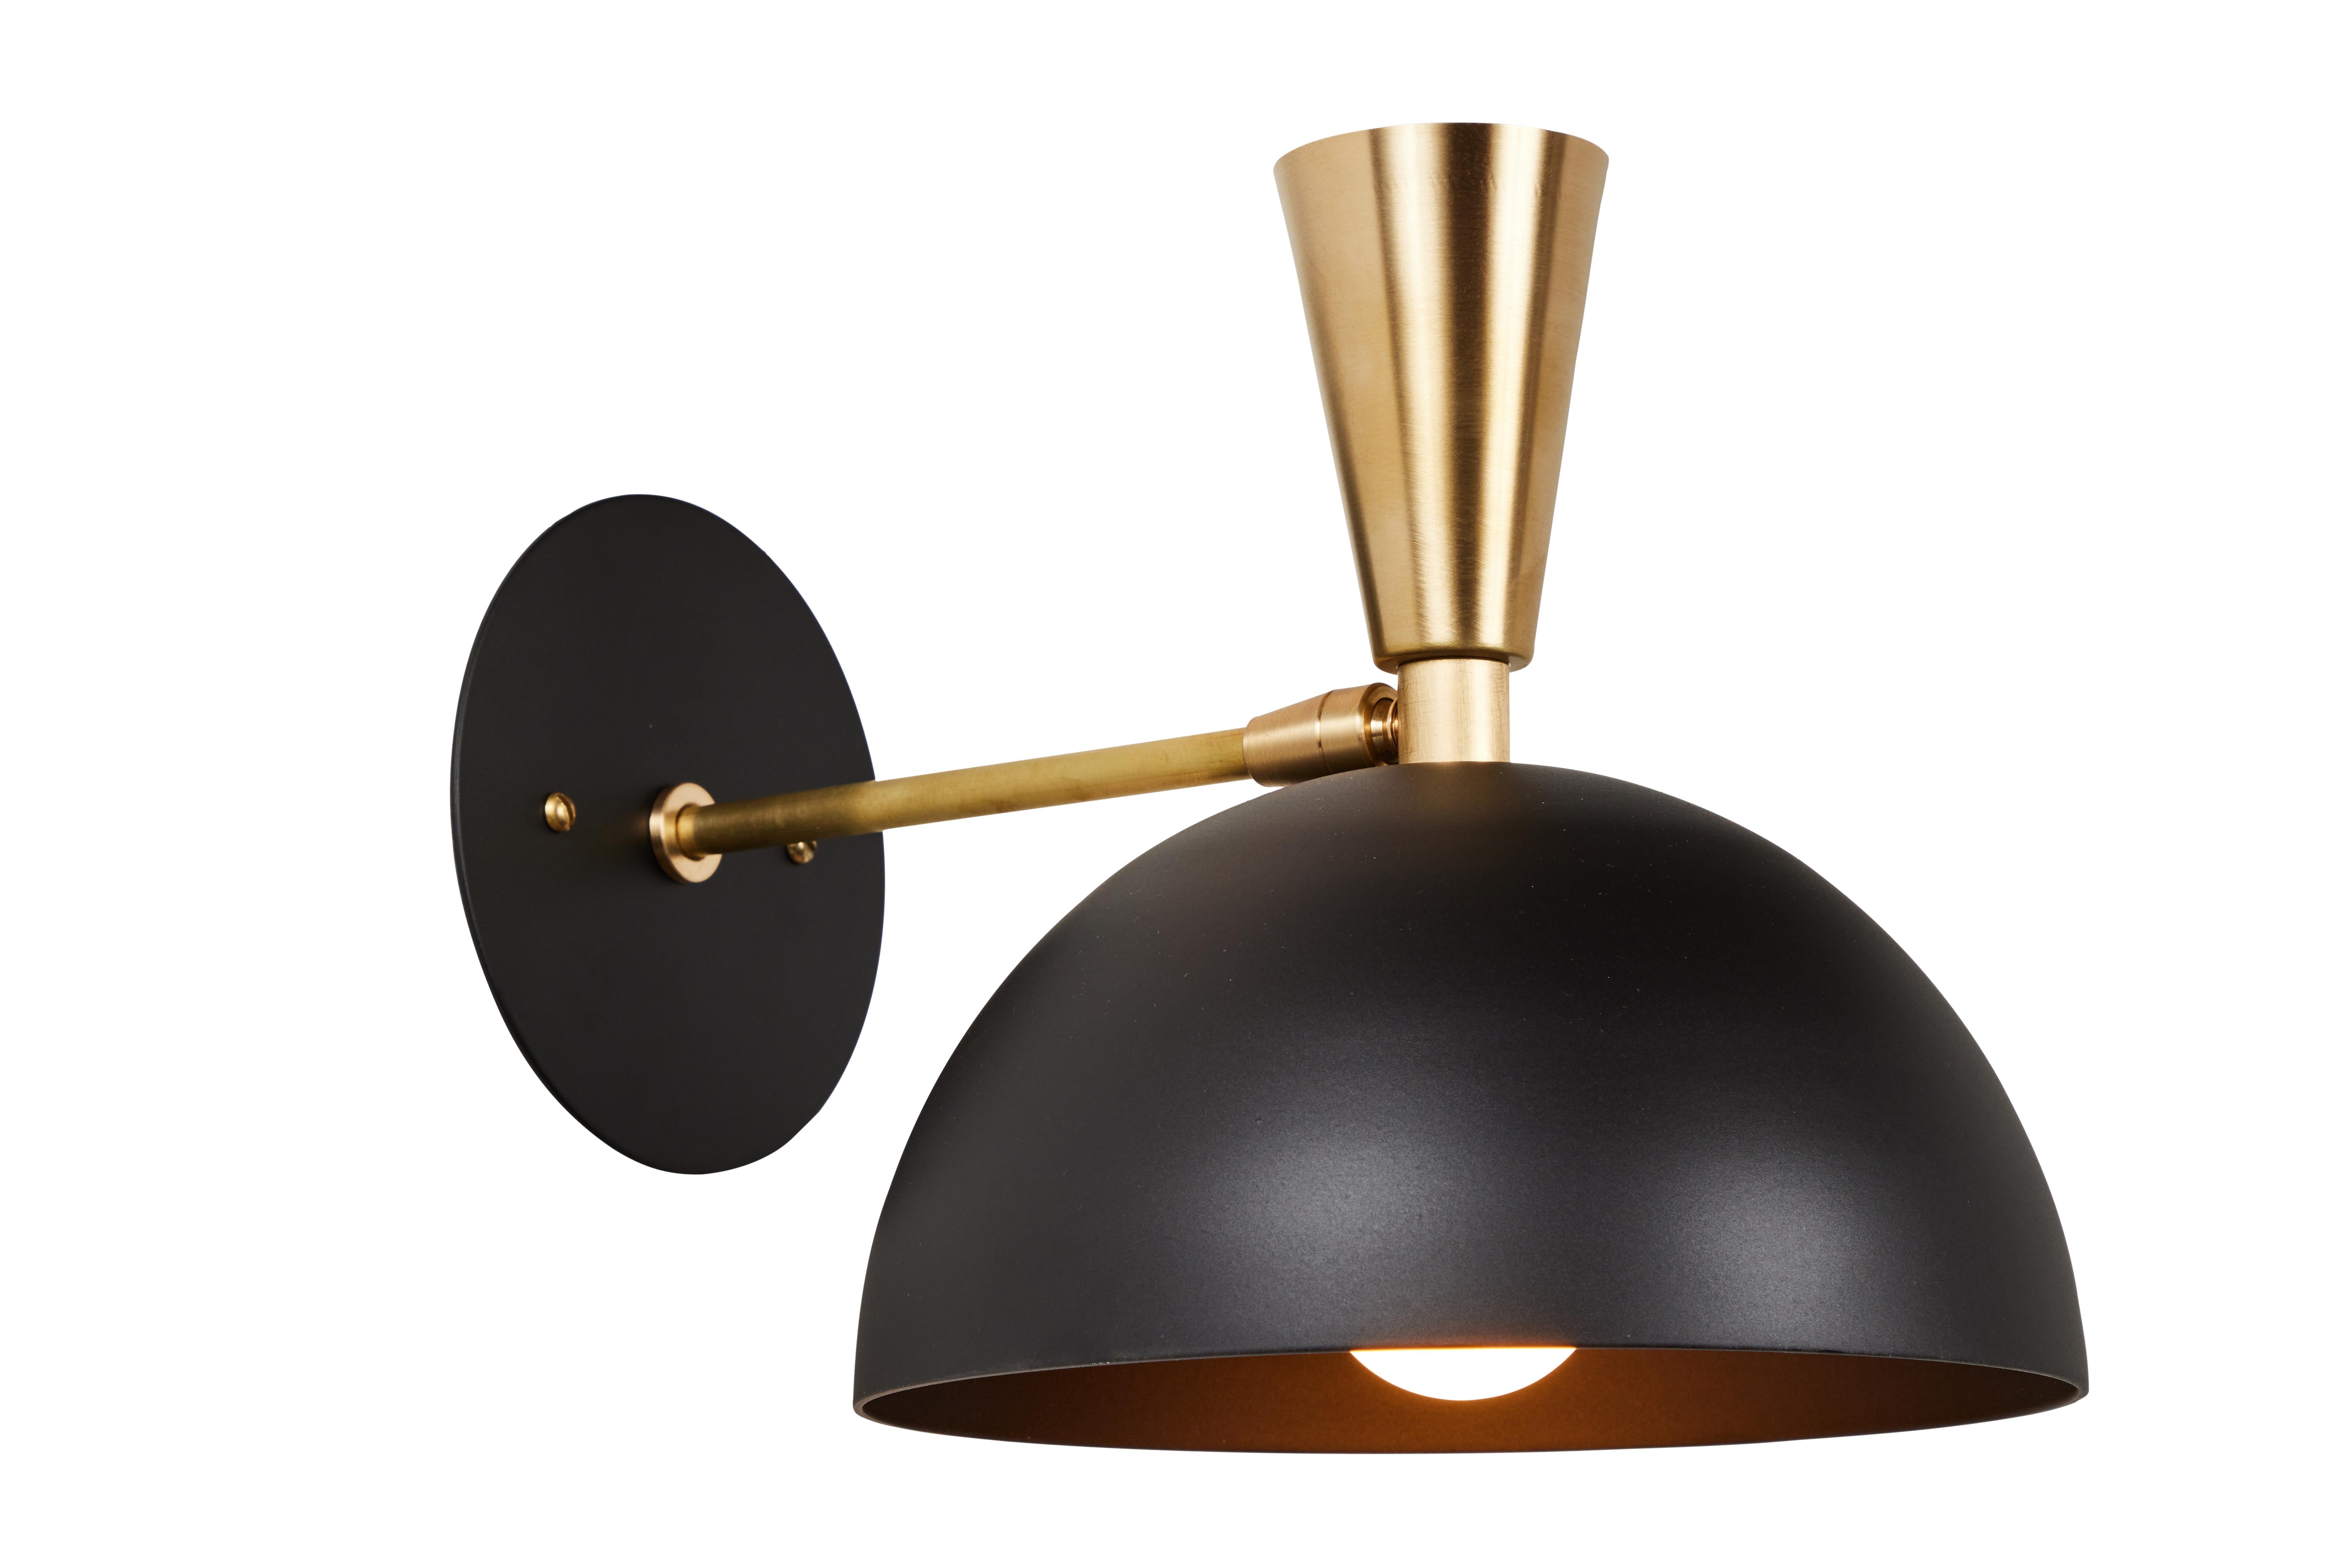 Pair of large 'Lola II' sconces in black metal and brass. 

Hand-fabricated by Los Angeles based designer and lighting professional Alvaro Benitez, these highly refined sconces are reminiscent of the iconic midcentury Italian designs of Arteluce and